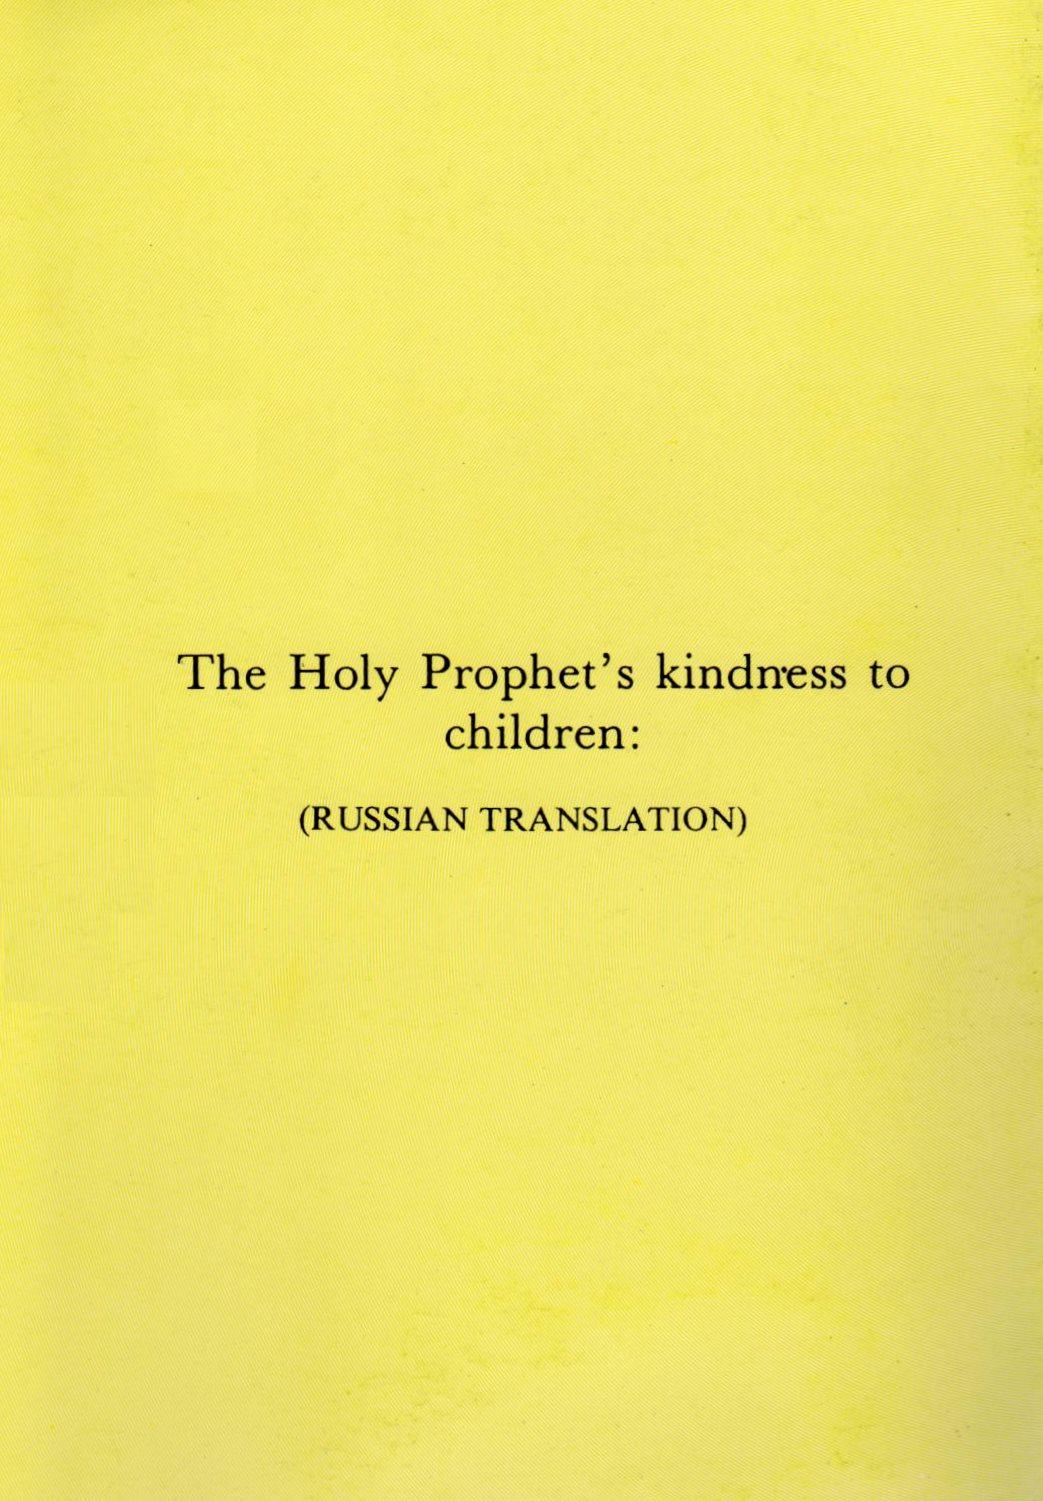 The Holy Prophets kindness to children